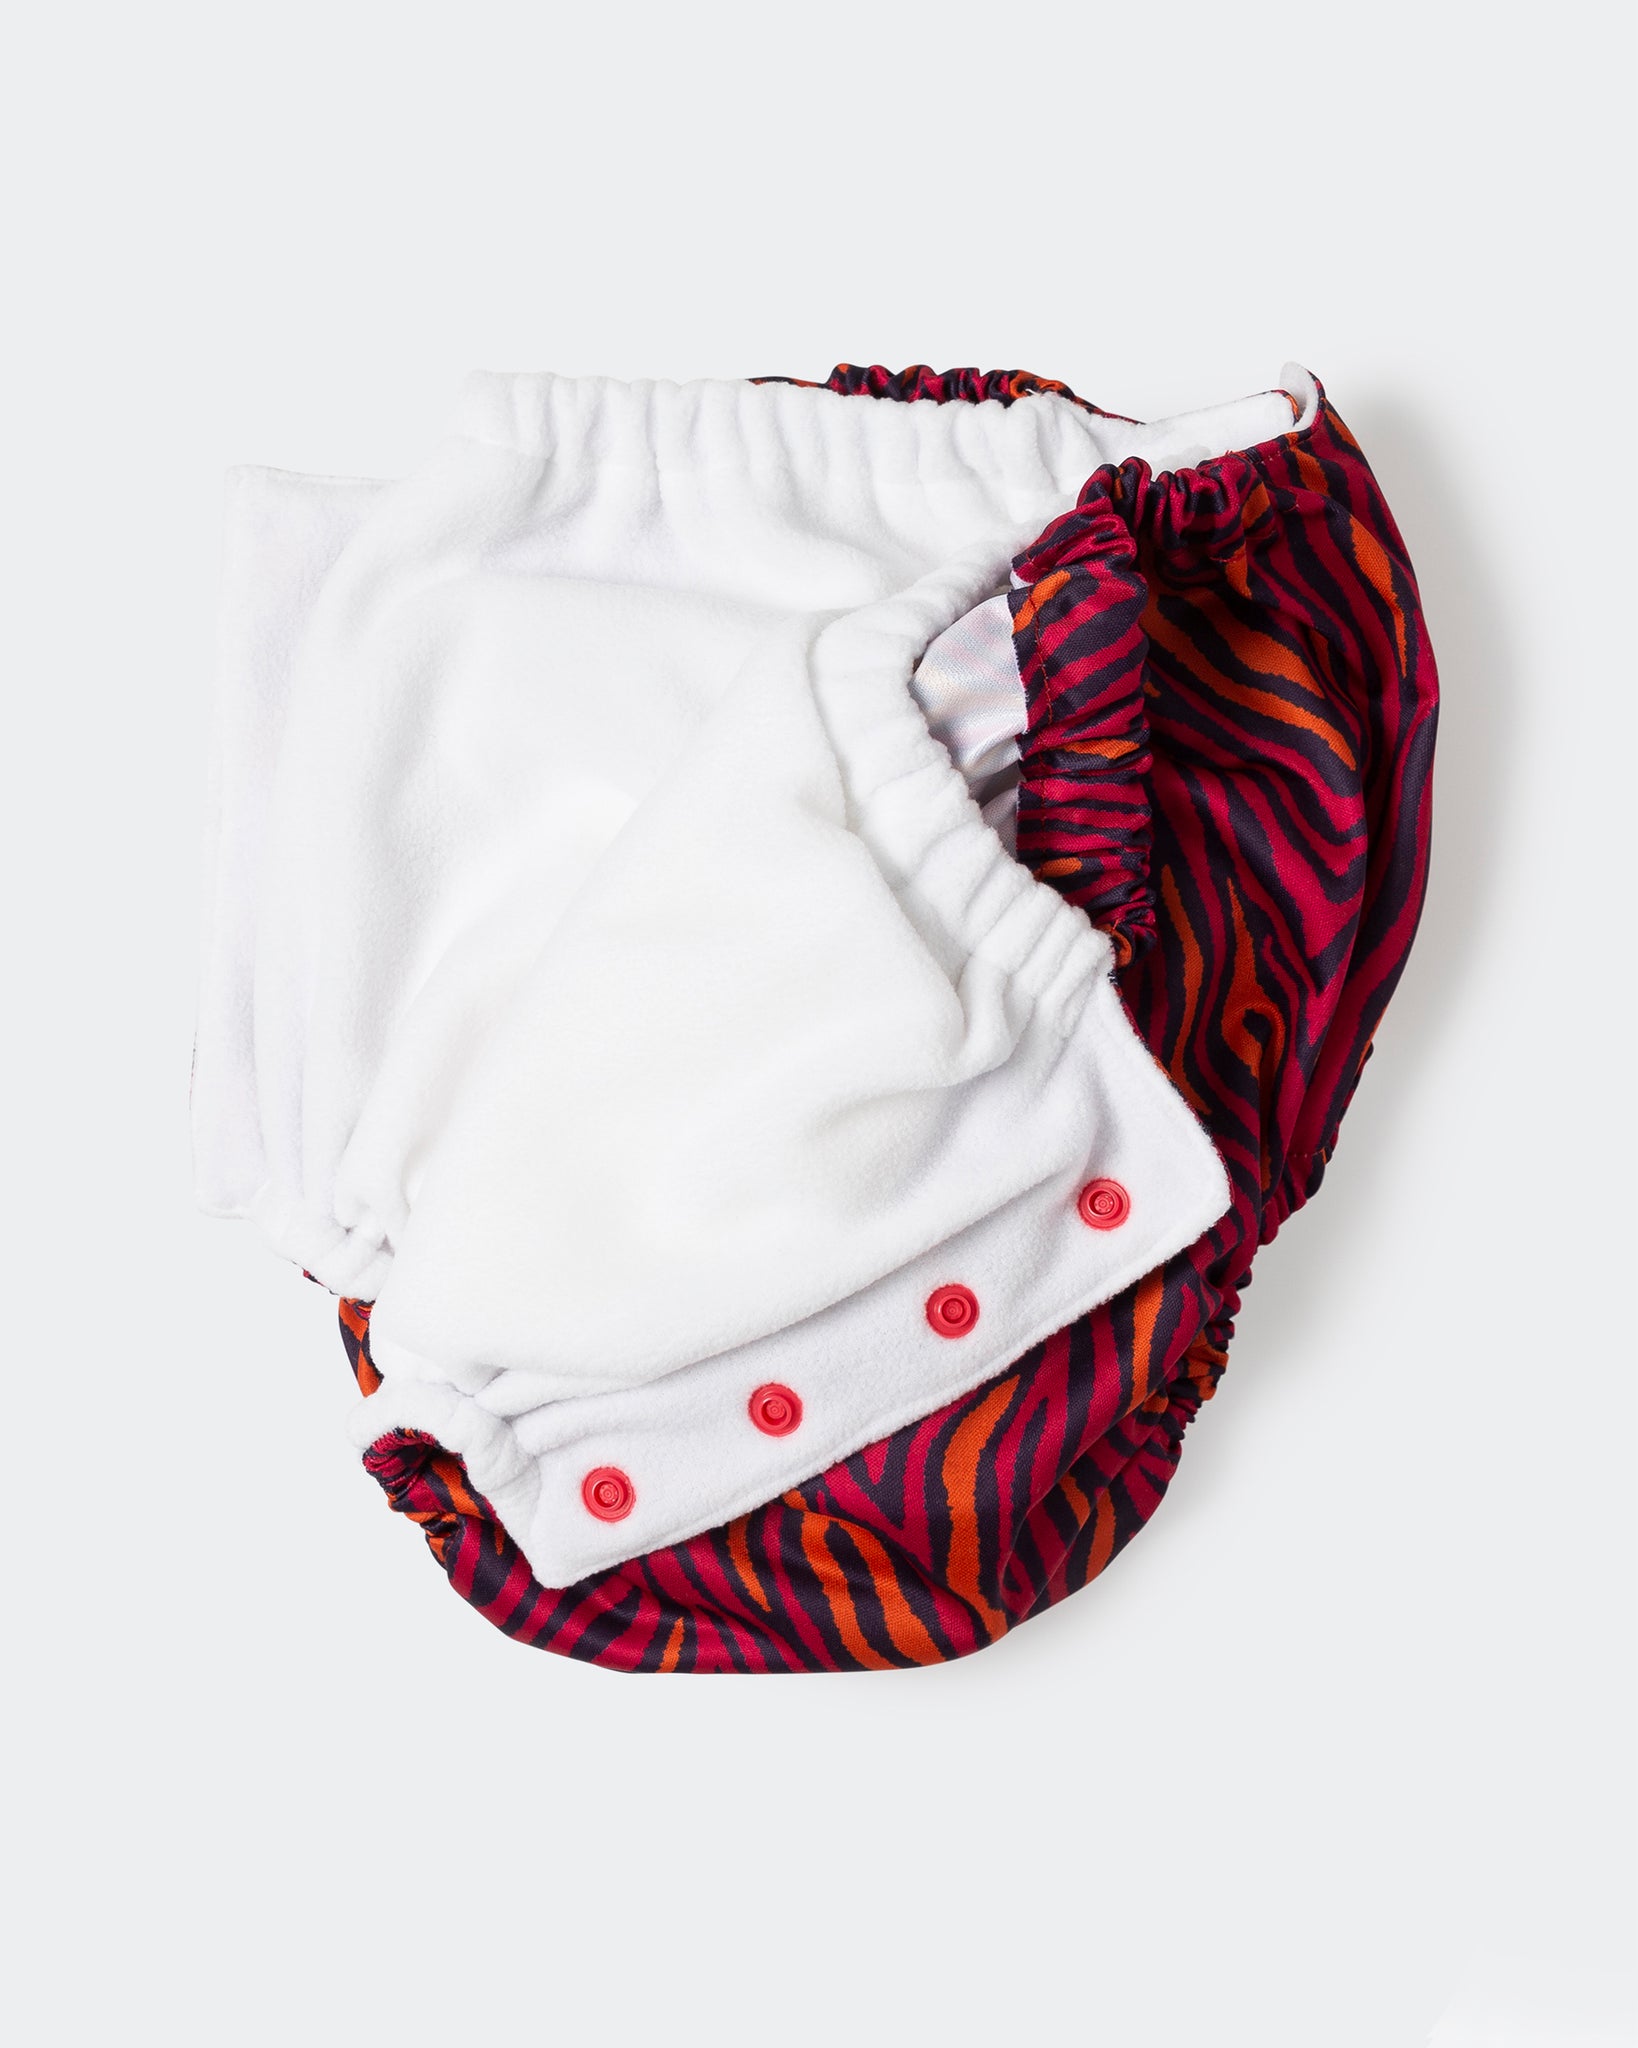 BUTTS Continence Aid (Kids) - Moderate/Heavy - Zebra Red